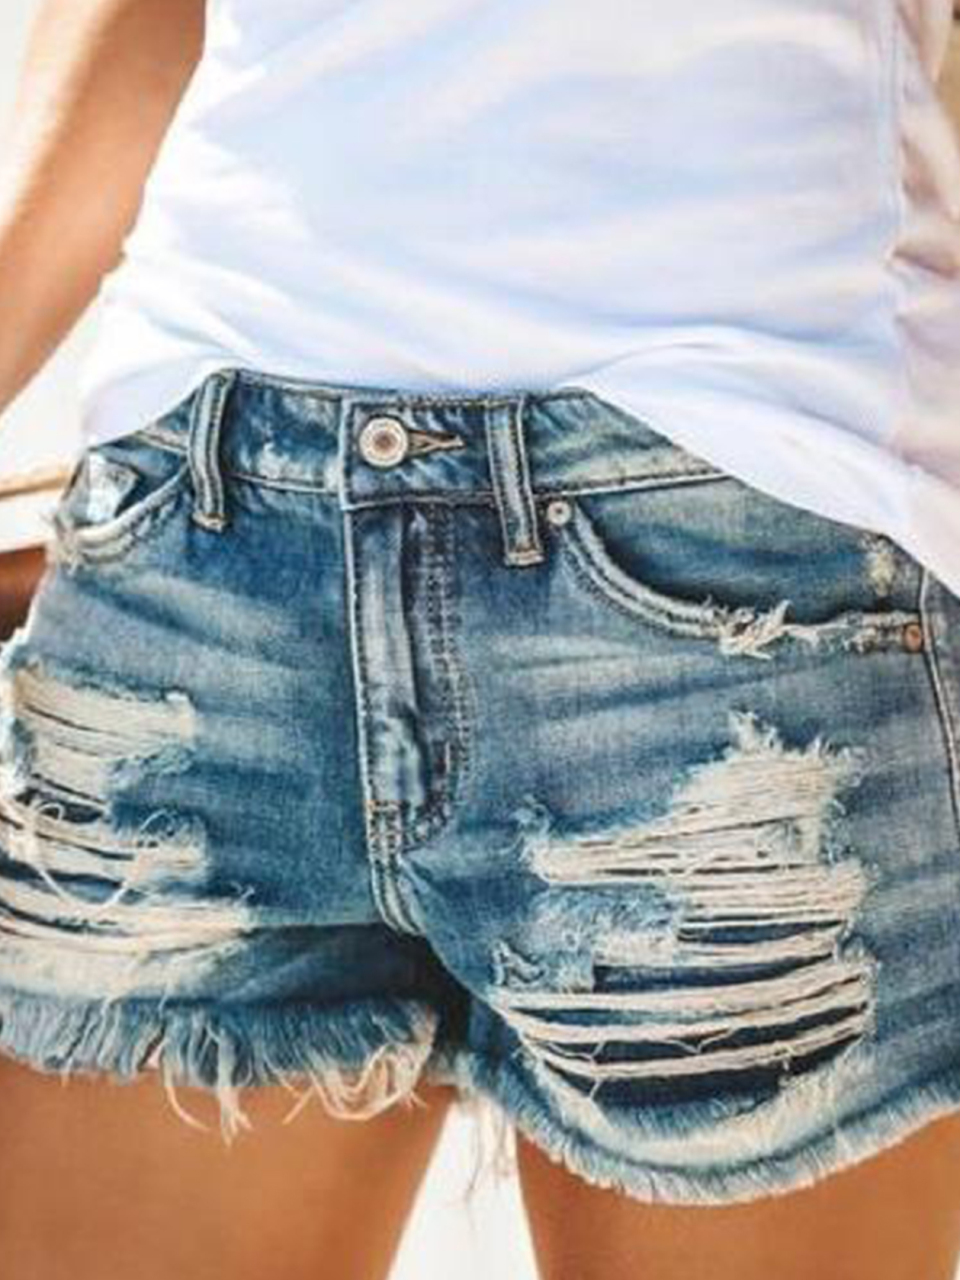 Women's High-Waisted, Fringed, Cut-Out Denim Shorts